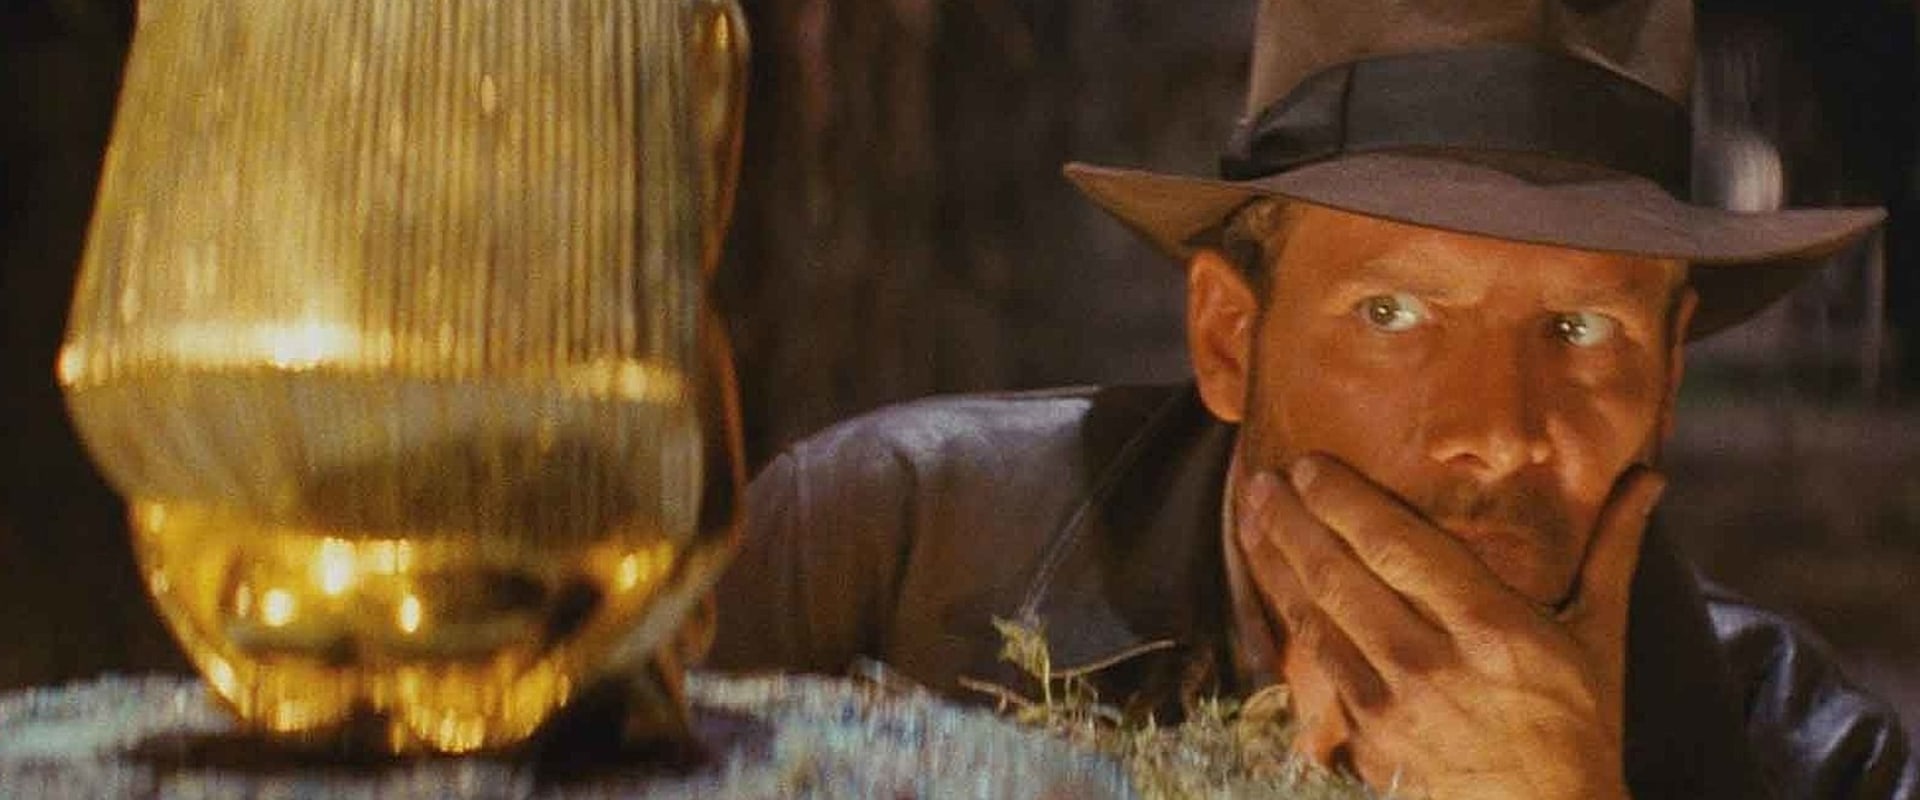 Which indiana jones has the boulder?